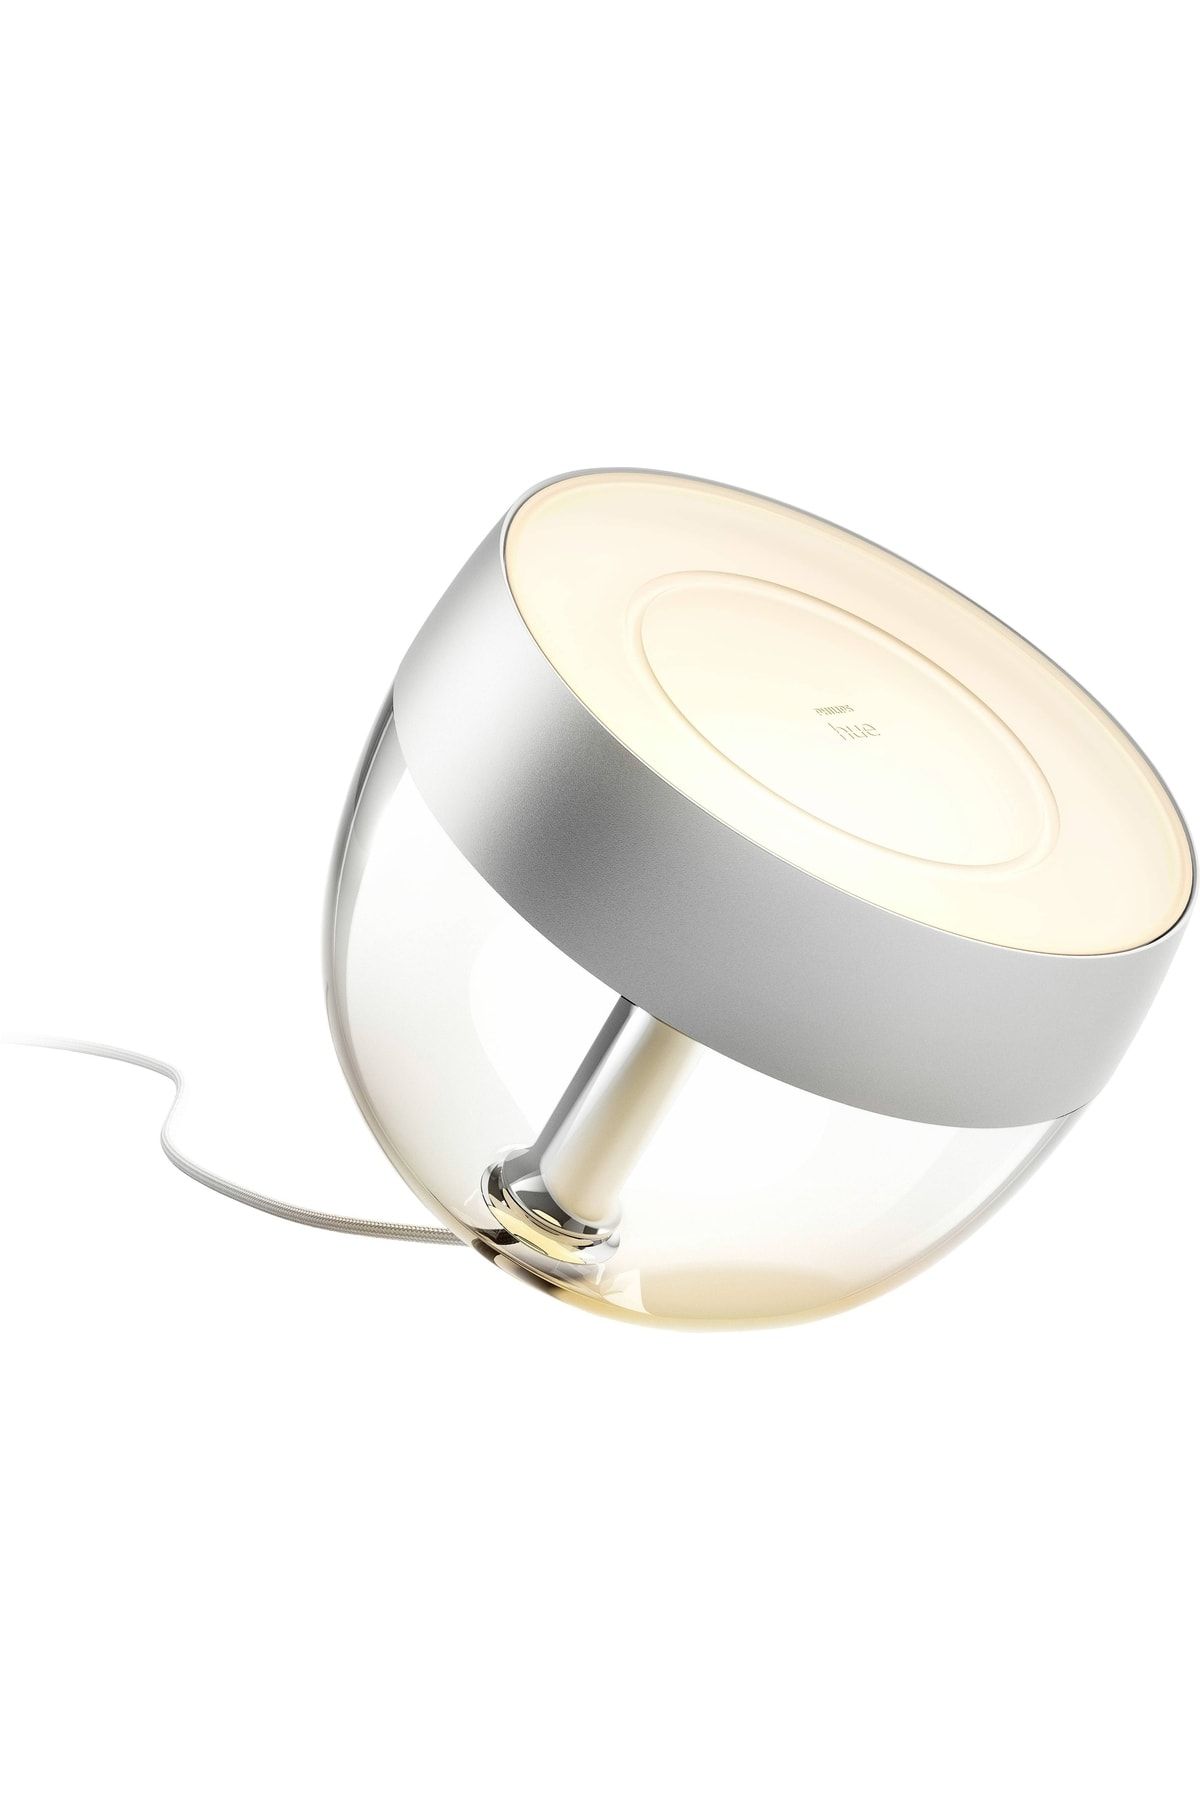 Philips Hue Iris - Silver (Special Edition)